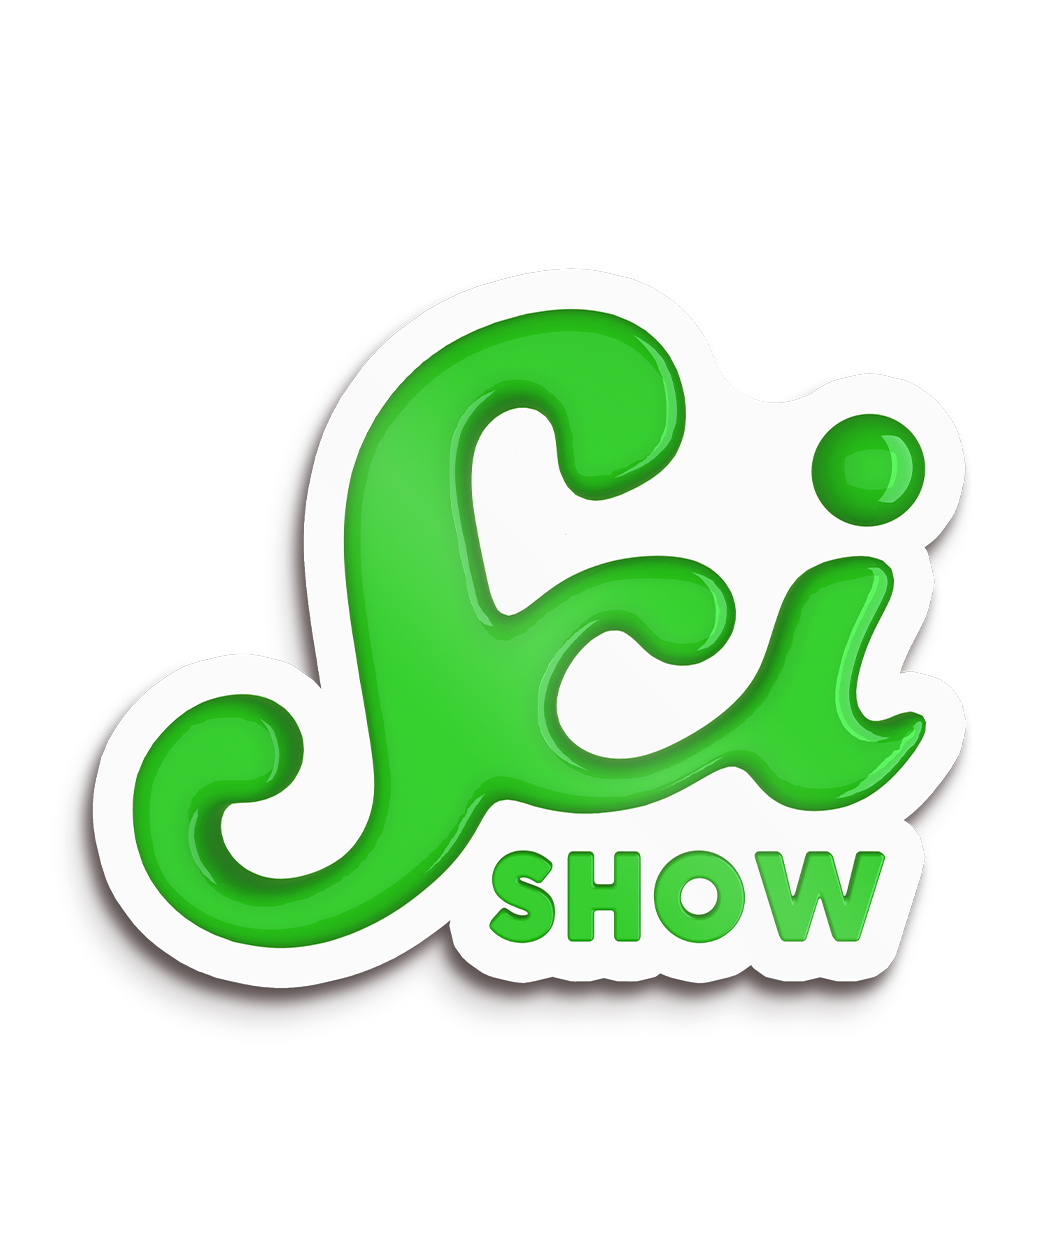 White base sticker with “Sci” in cursive green font with “show” beneath in green sans serif font - from SciShow